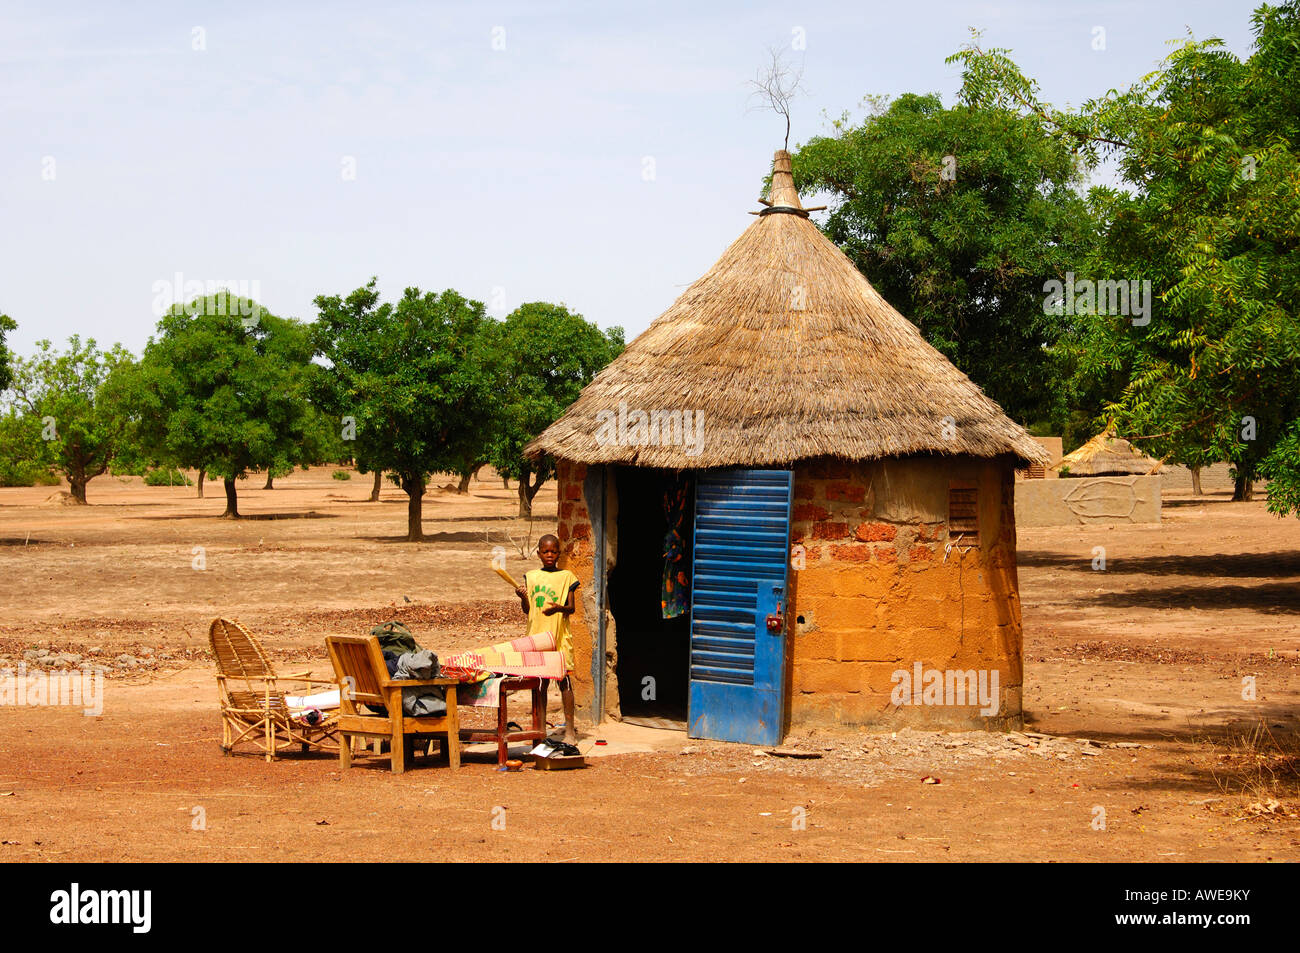 African round hut with thatched roof and interior furniture placed outside during household clean-up, Burkina Faso Stock Photo